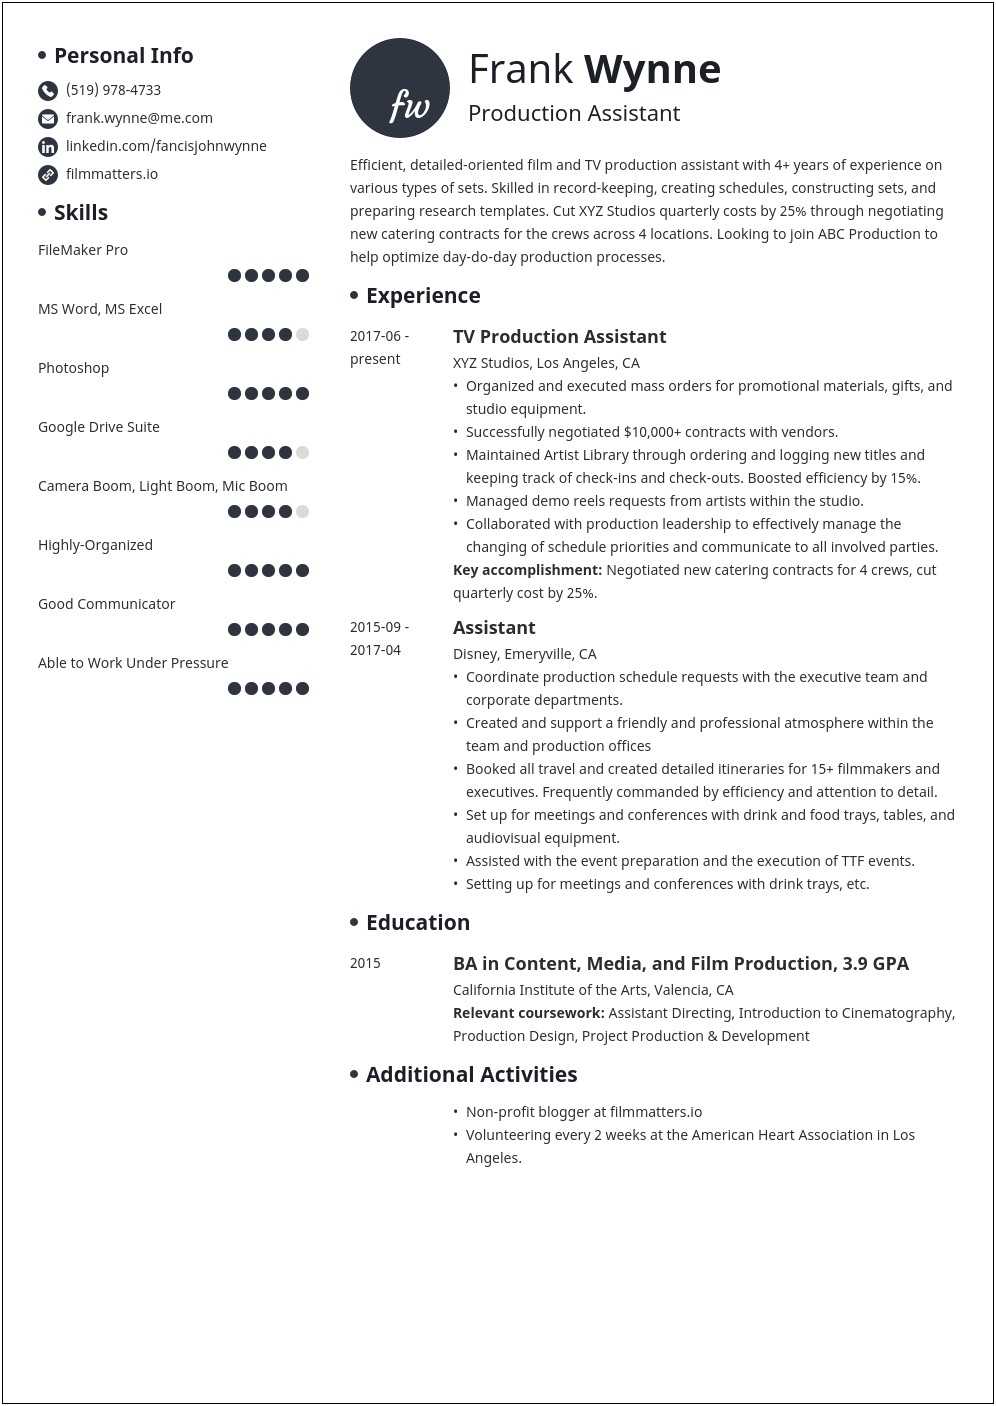 Resume Words For Tv Production Assistant